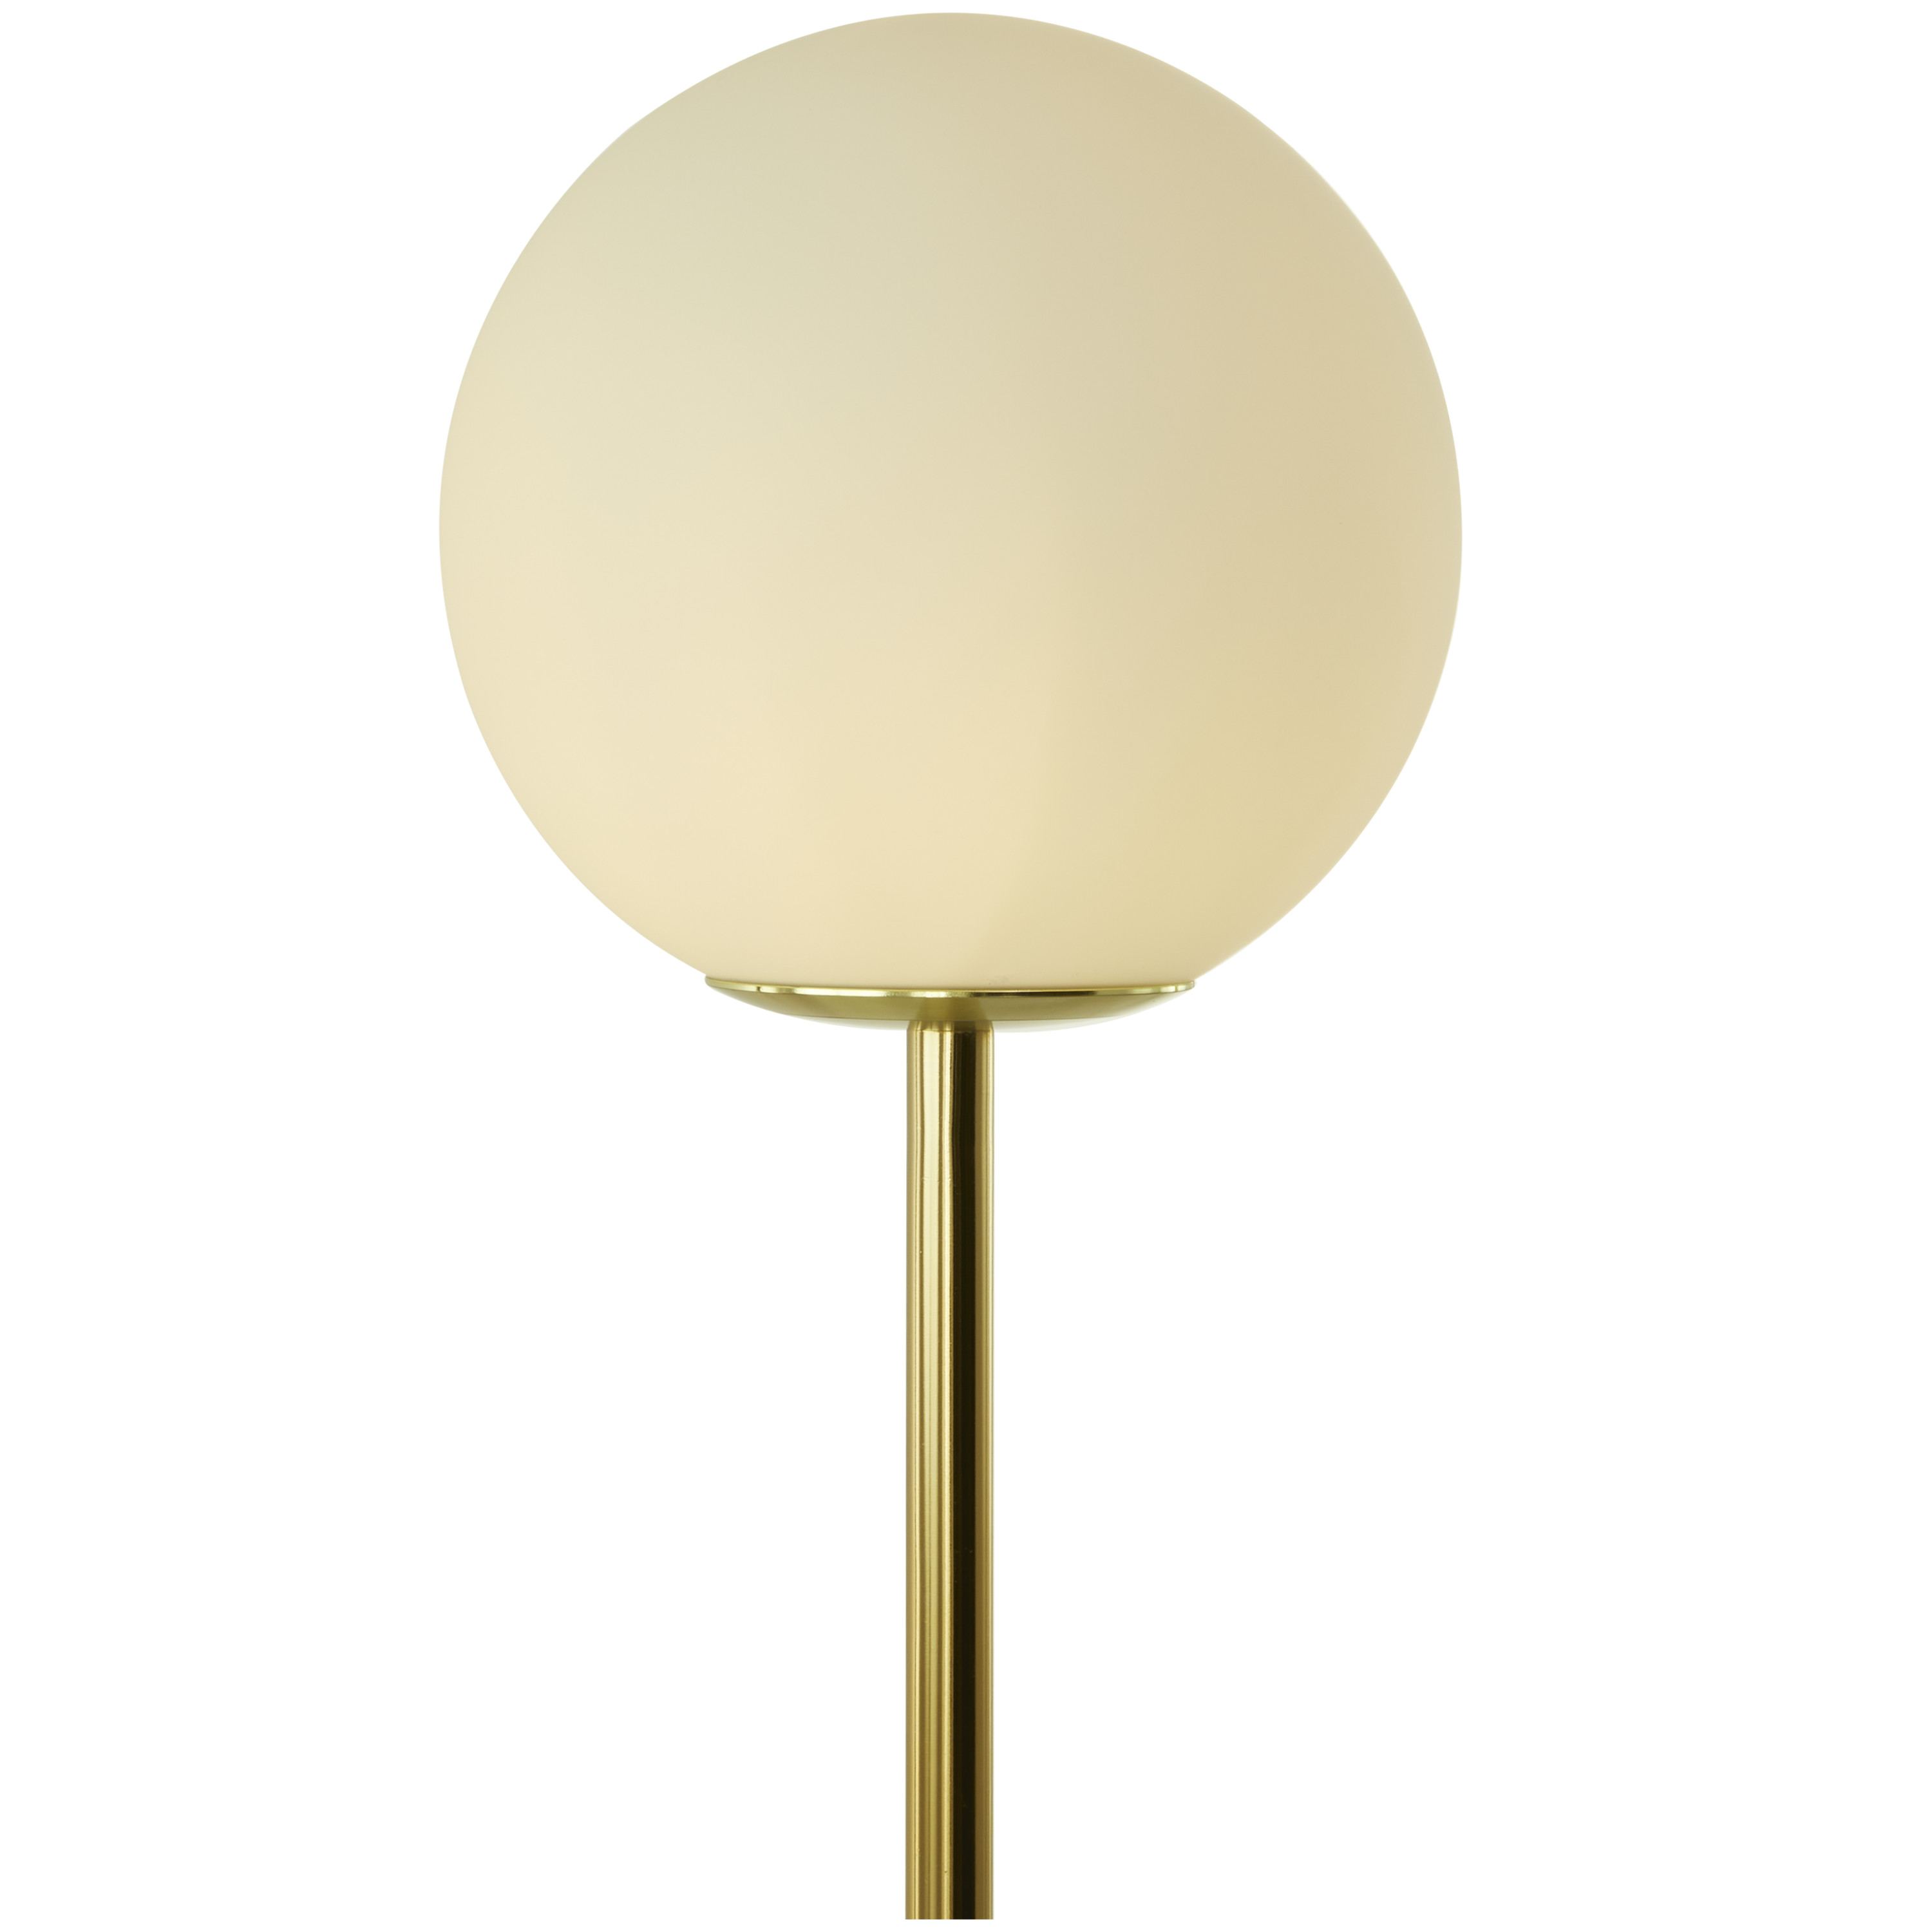 DecMode 73" 2 Light Orb Gold Floor Lamp with White Glass Shade - image 4 of 9